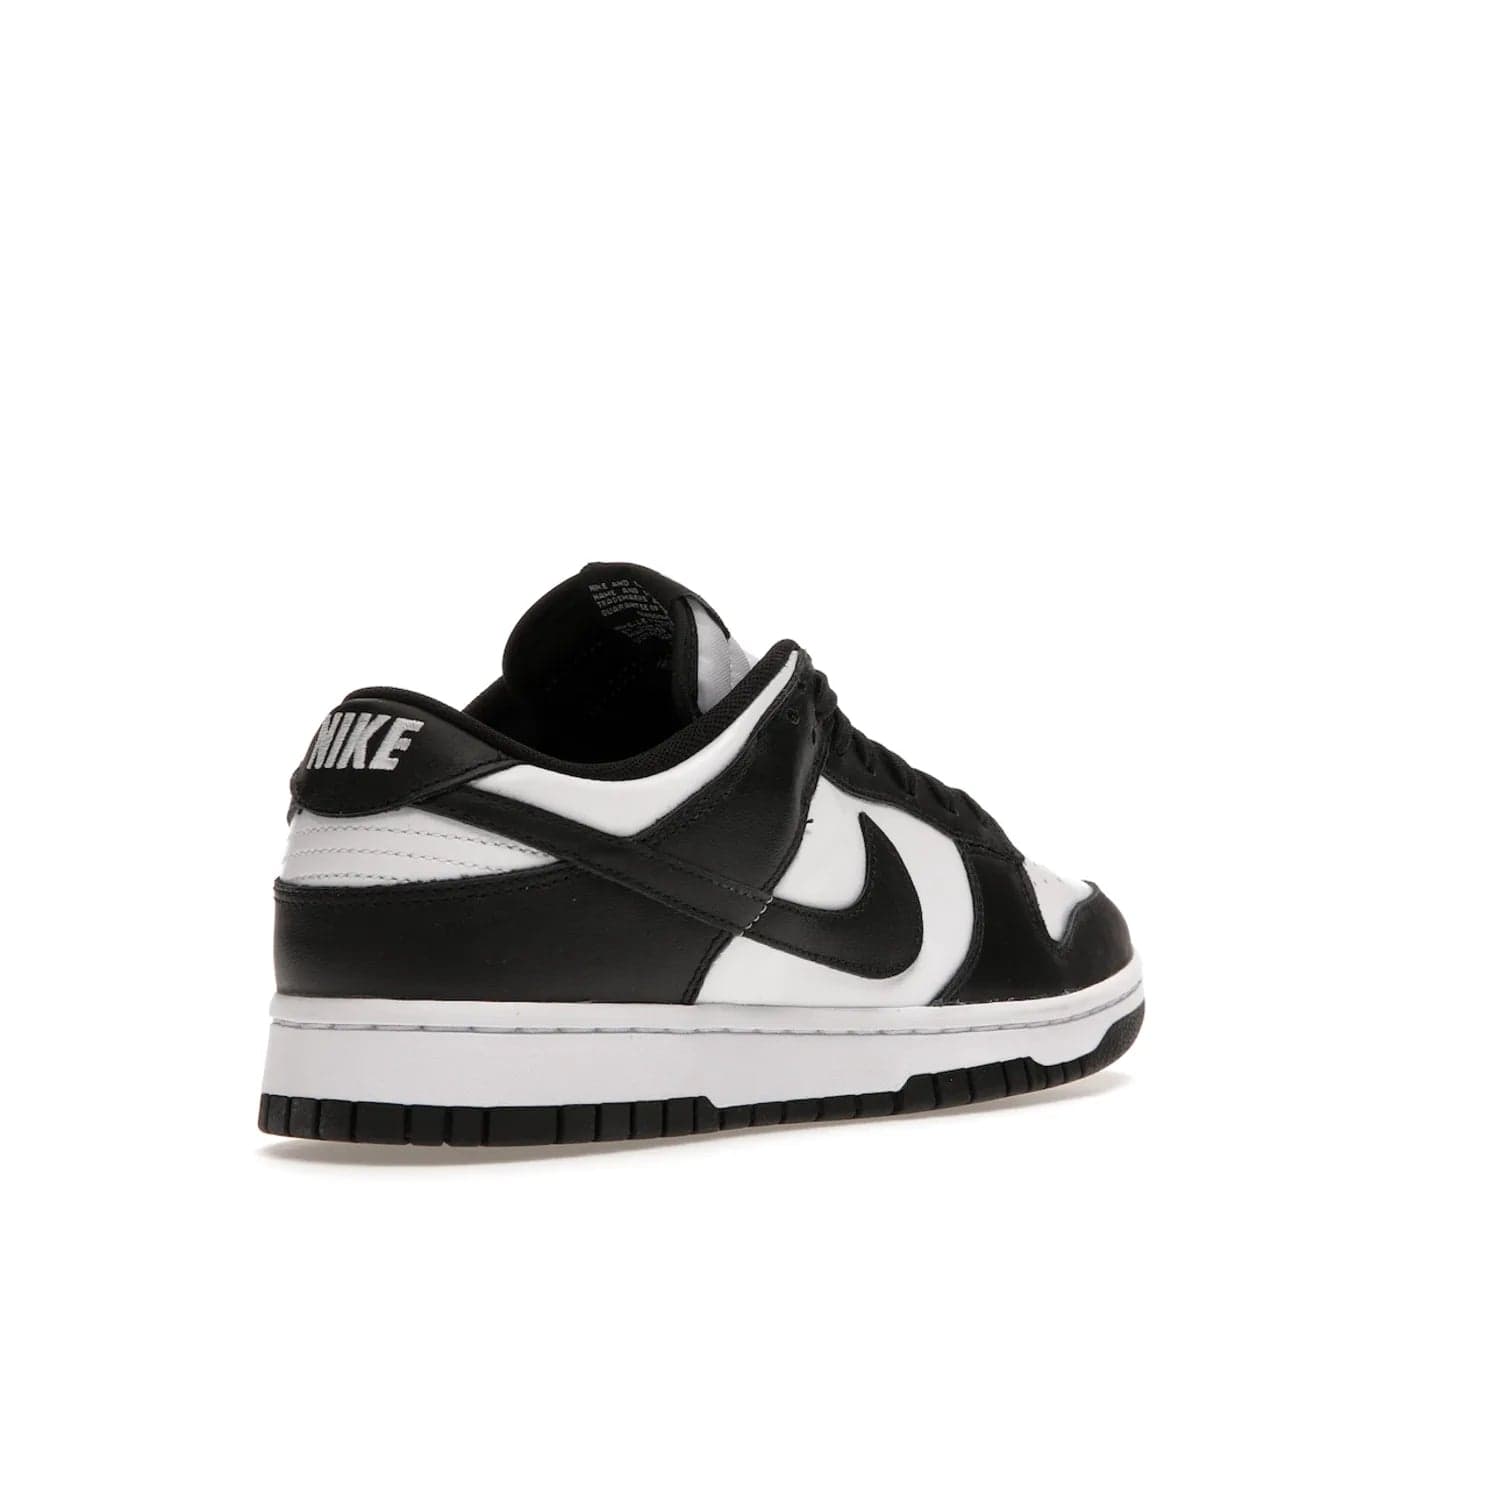 Nike Dunk Low Retro White Black Panda (2021) - Image 32 - Only at www.BallersClubKickz.com - Shop the Nike Dunk Low Retro White Black for classic styling featuring white leather with black leather overlays and classic Nike branding. Released in 2021, this timeless design offers a white midsole and black outsole for a stylish look. Shop all the Nike Dunks & rock this classic look.